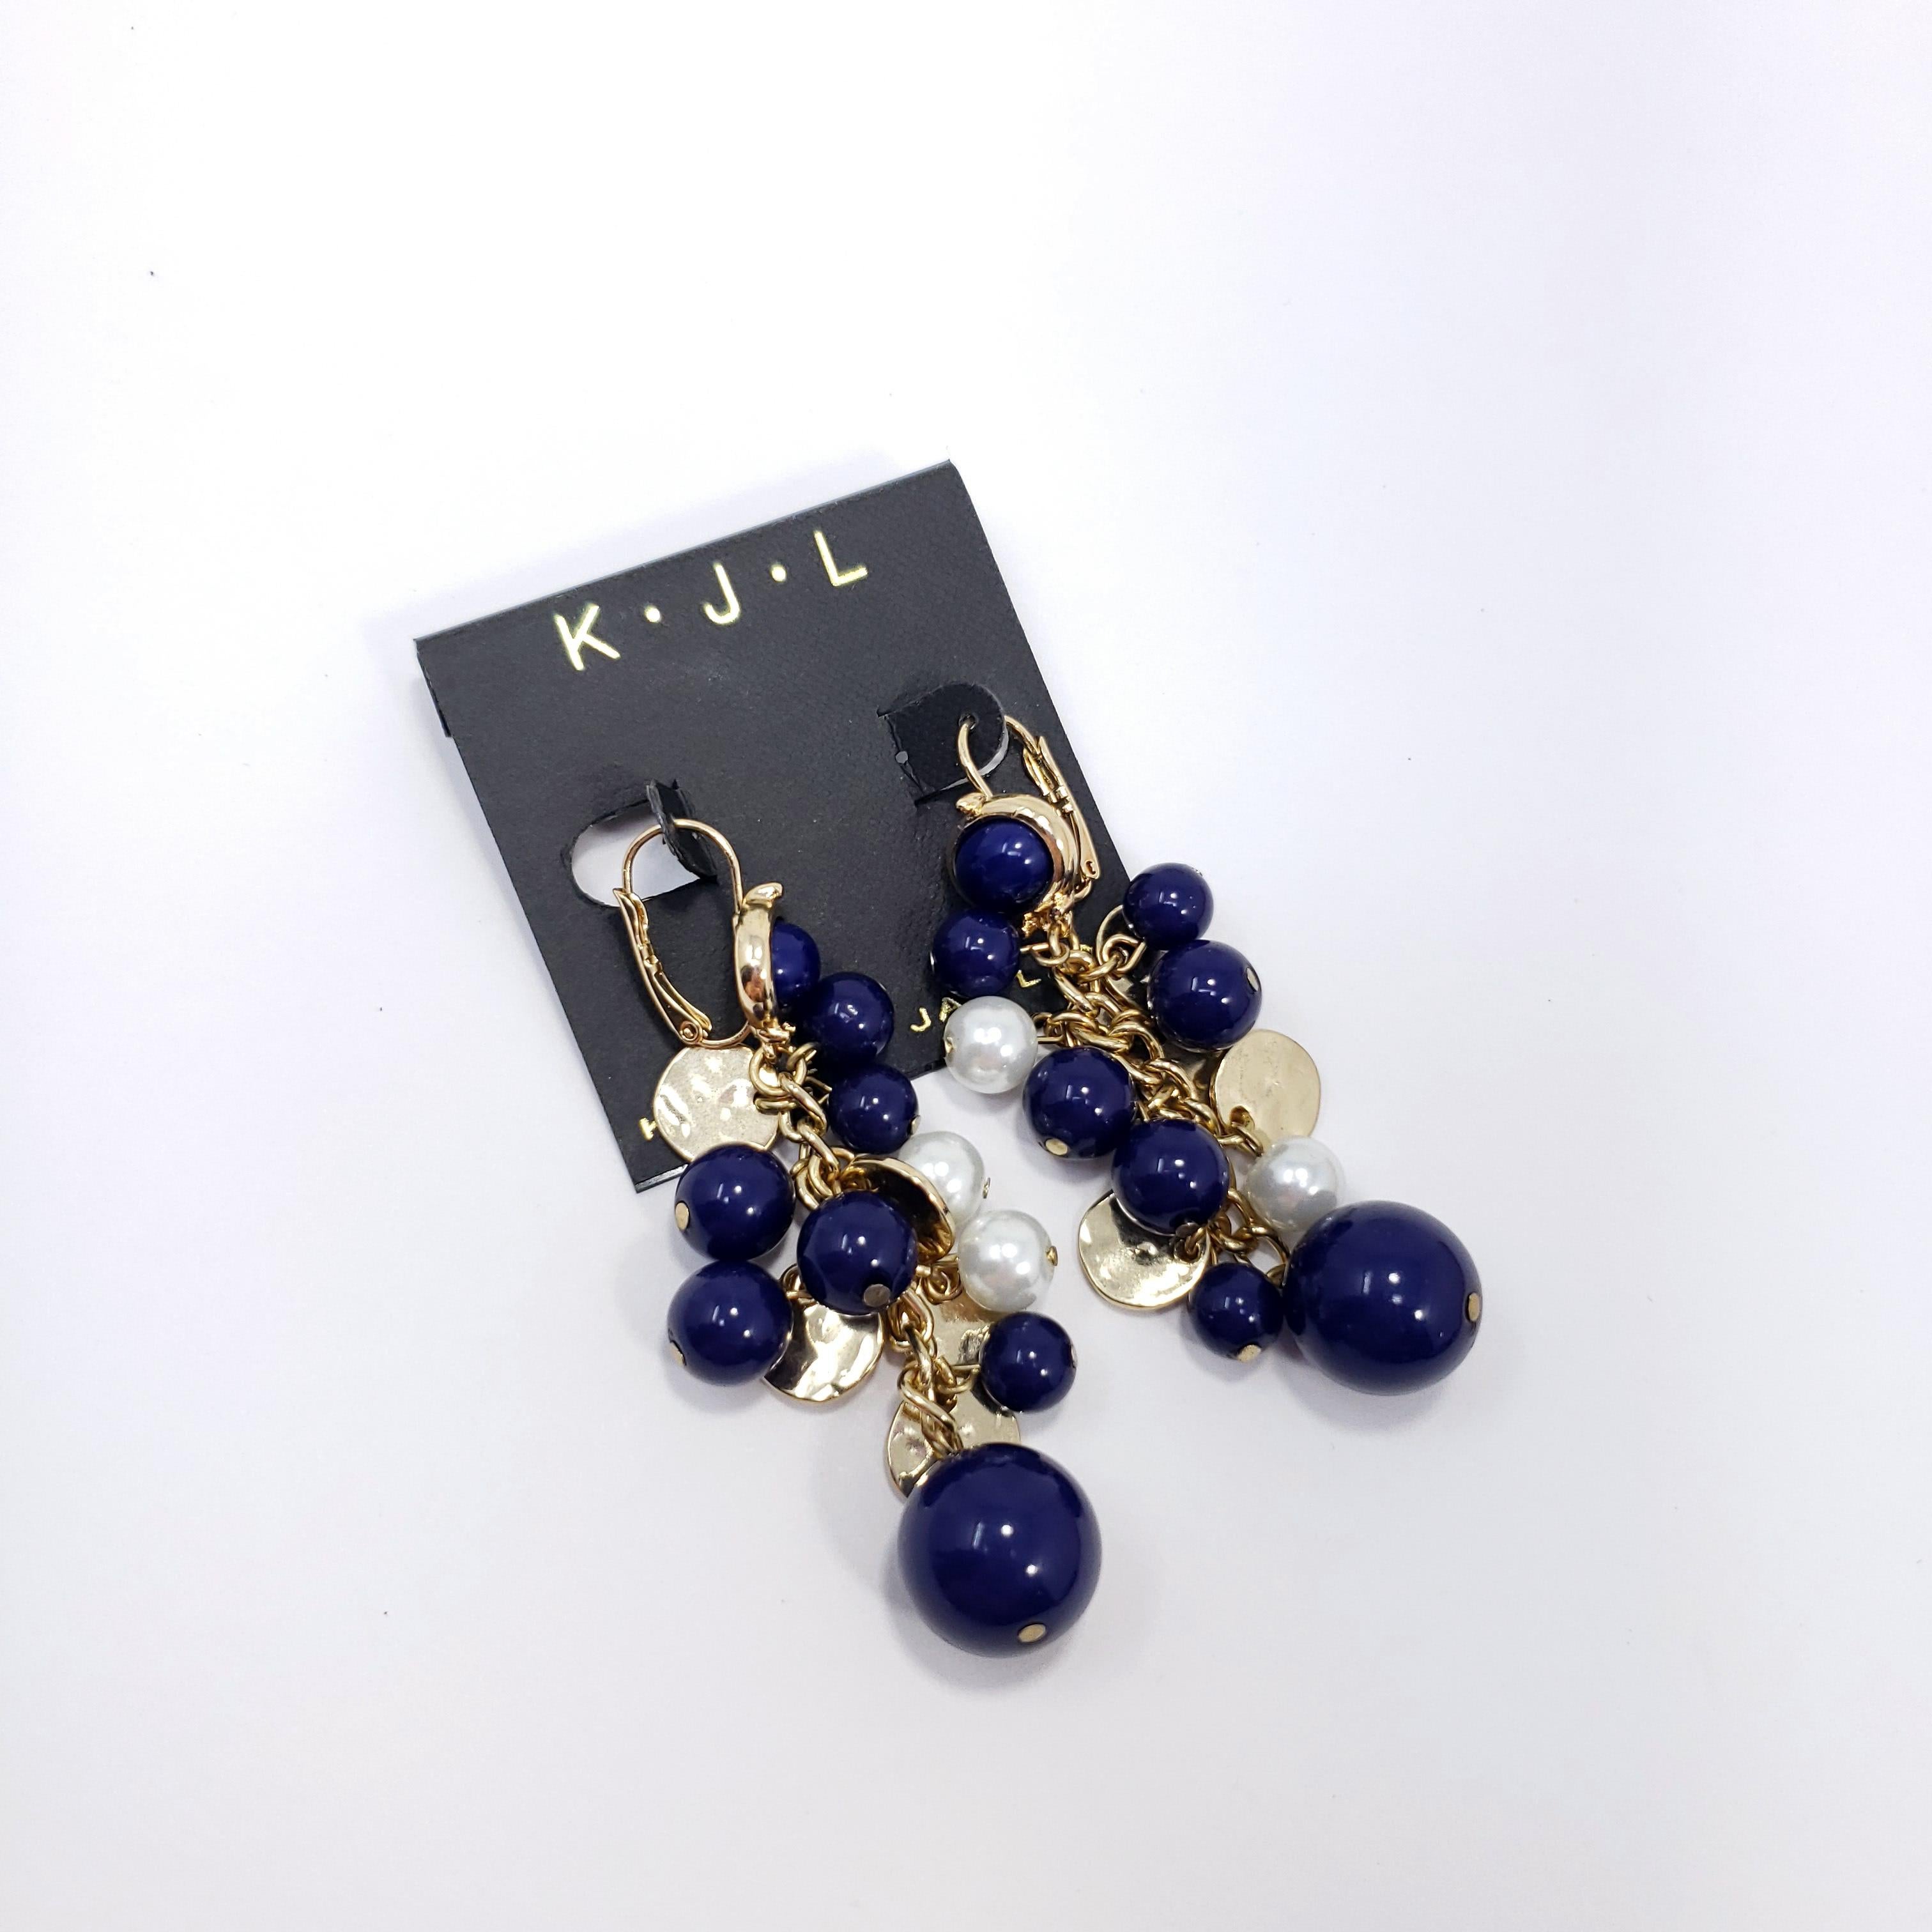 Stylish pair of cluster earrings by Kenneth Jay Lane. Add some glamour to any style with these gold-plated earrings decorated with faux lapis lazuli and pearl beads.

Hallmarks: Kenneth Lane